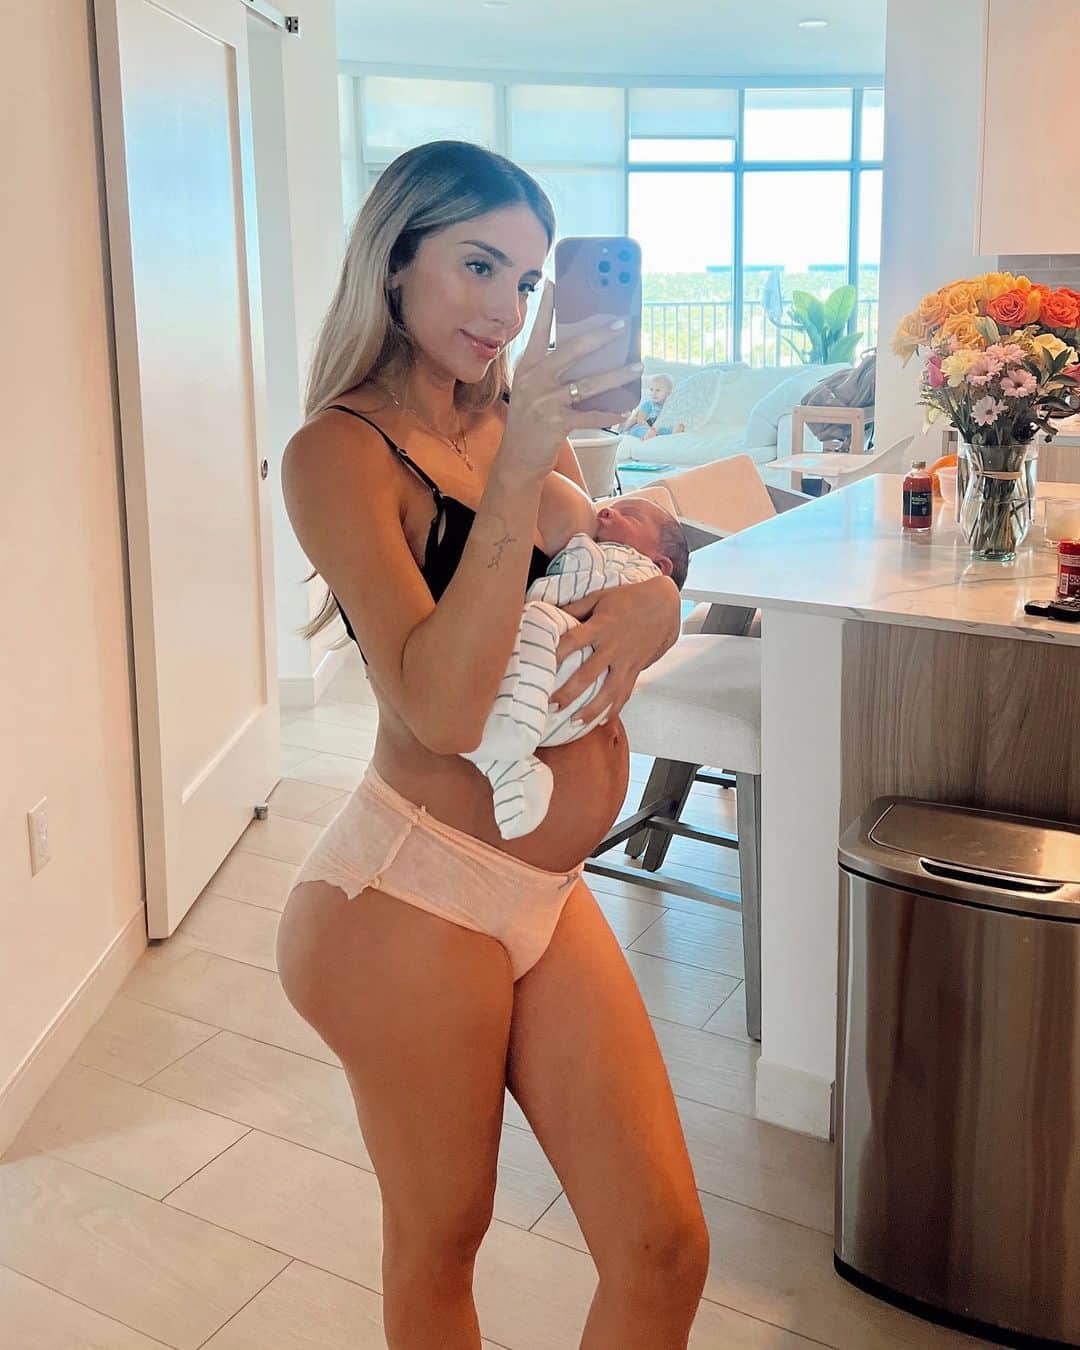 Bruna Rangel Limaのインスタグラム：「The diaper stage 🙈  Soaking it all in because time really does fly 😮‍💨 Day 3 of being home & recovery is going so well and I realized some of the things I feared the most weren’t so bad after all! What a difference it’s been recovering this time around. Still really in awe with my birth experience & can’t wait to talk to you guys more about it🤍」